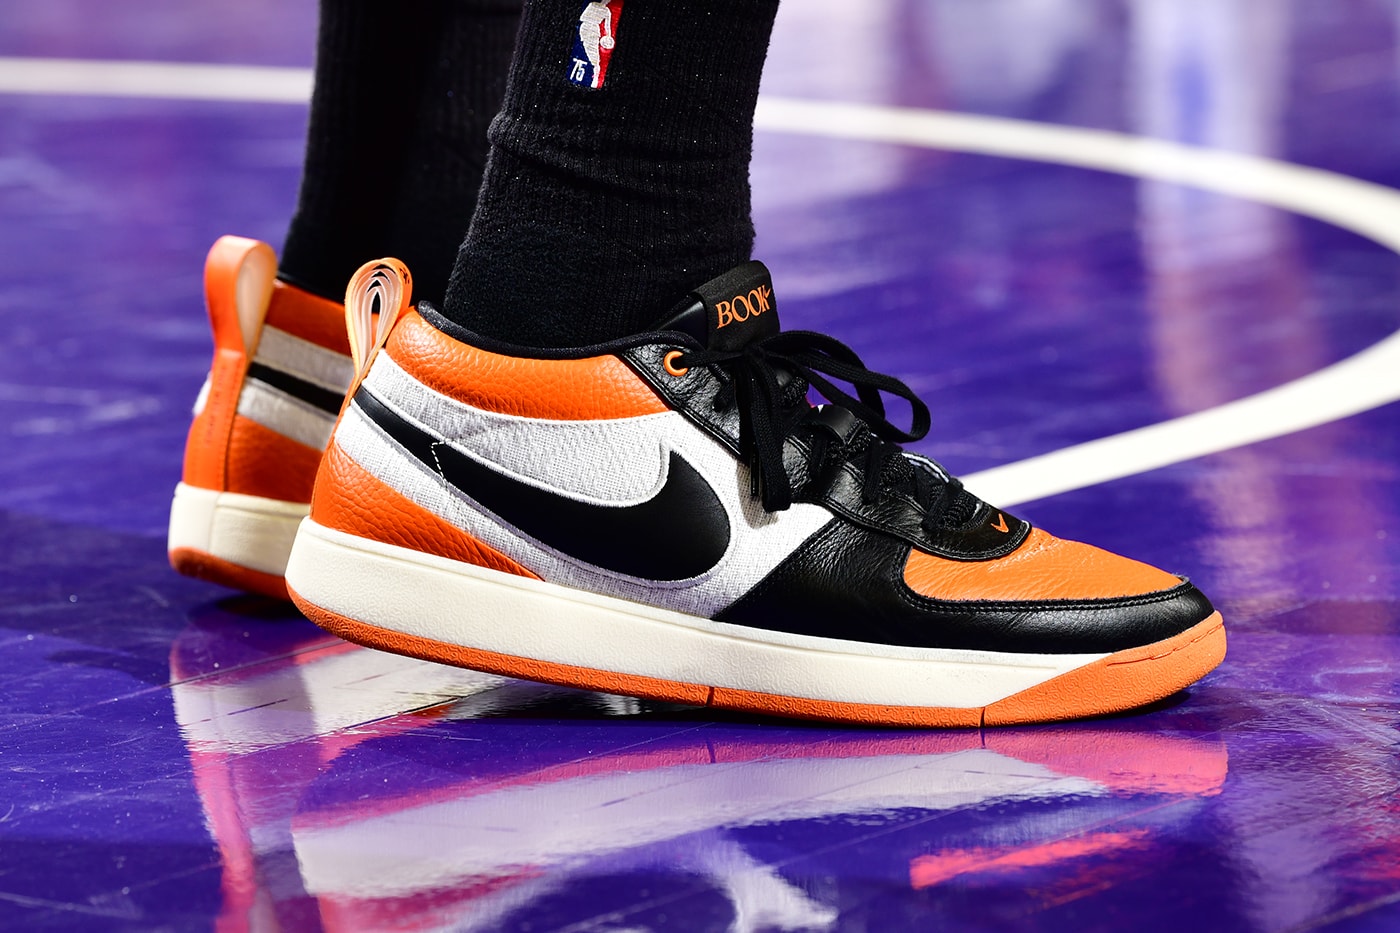 devin booker nike book 1 signature shoe shattered backboard pe player edition white sail orange official release date info photos price store list buying guide